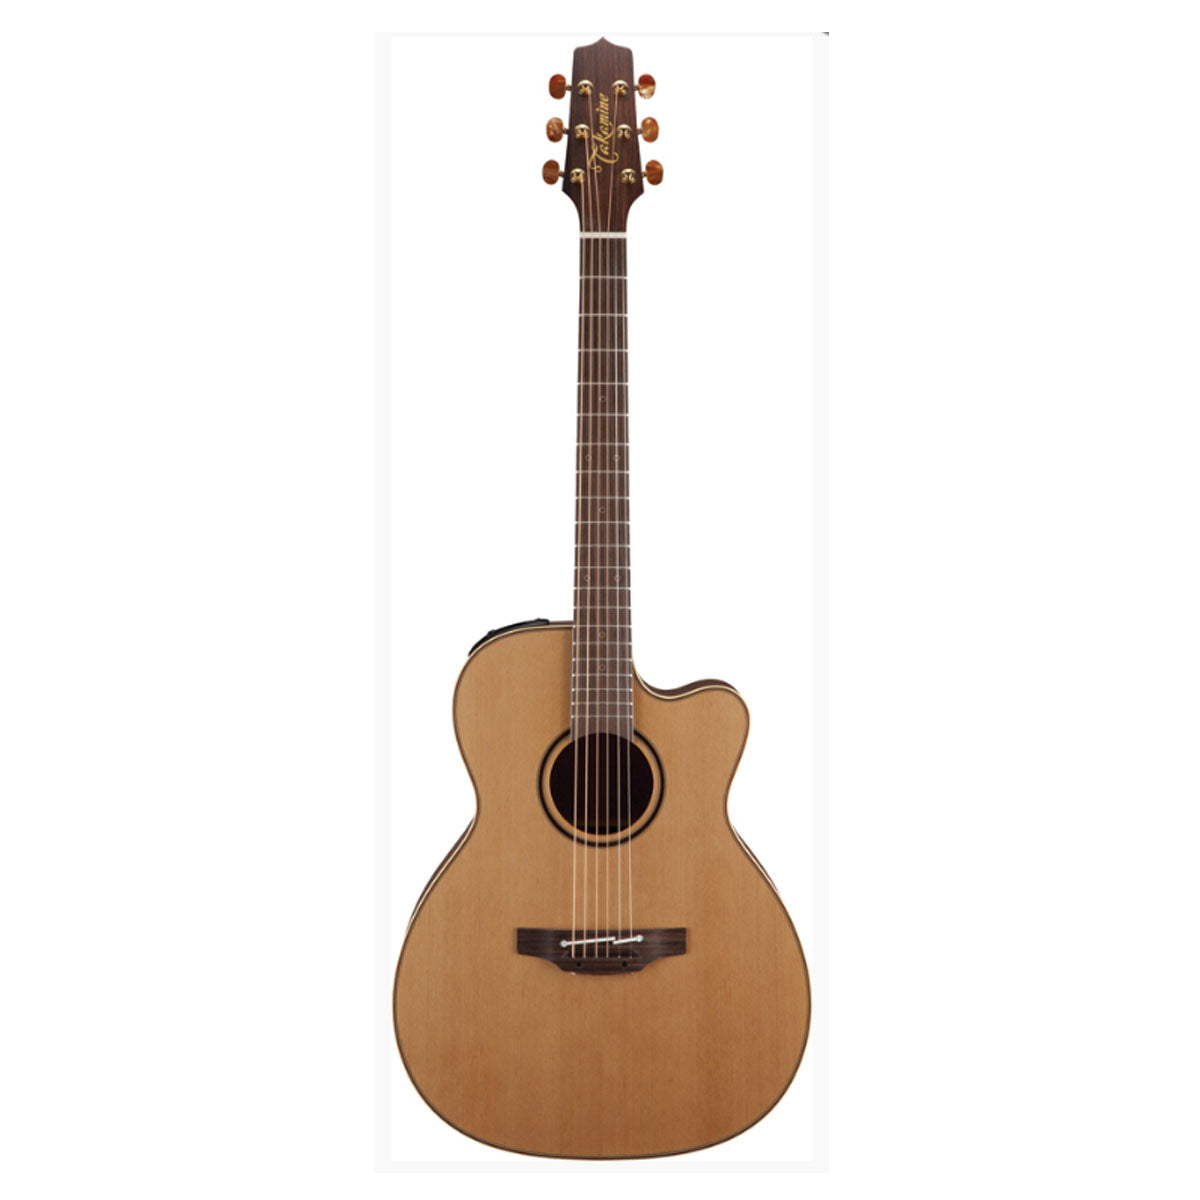 Takamine P3MC Pro Series 3 Acoustic Guitar Orchestral Natural w/ Pickup